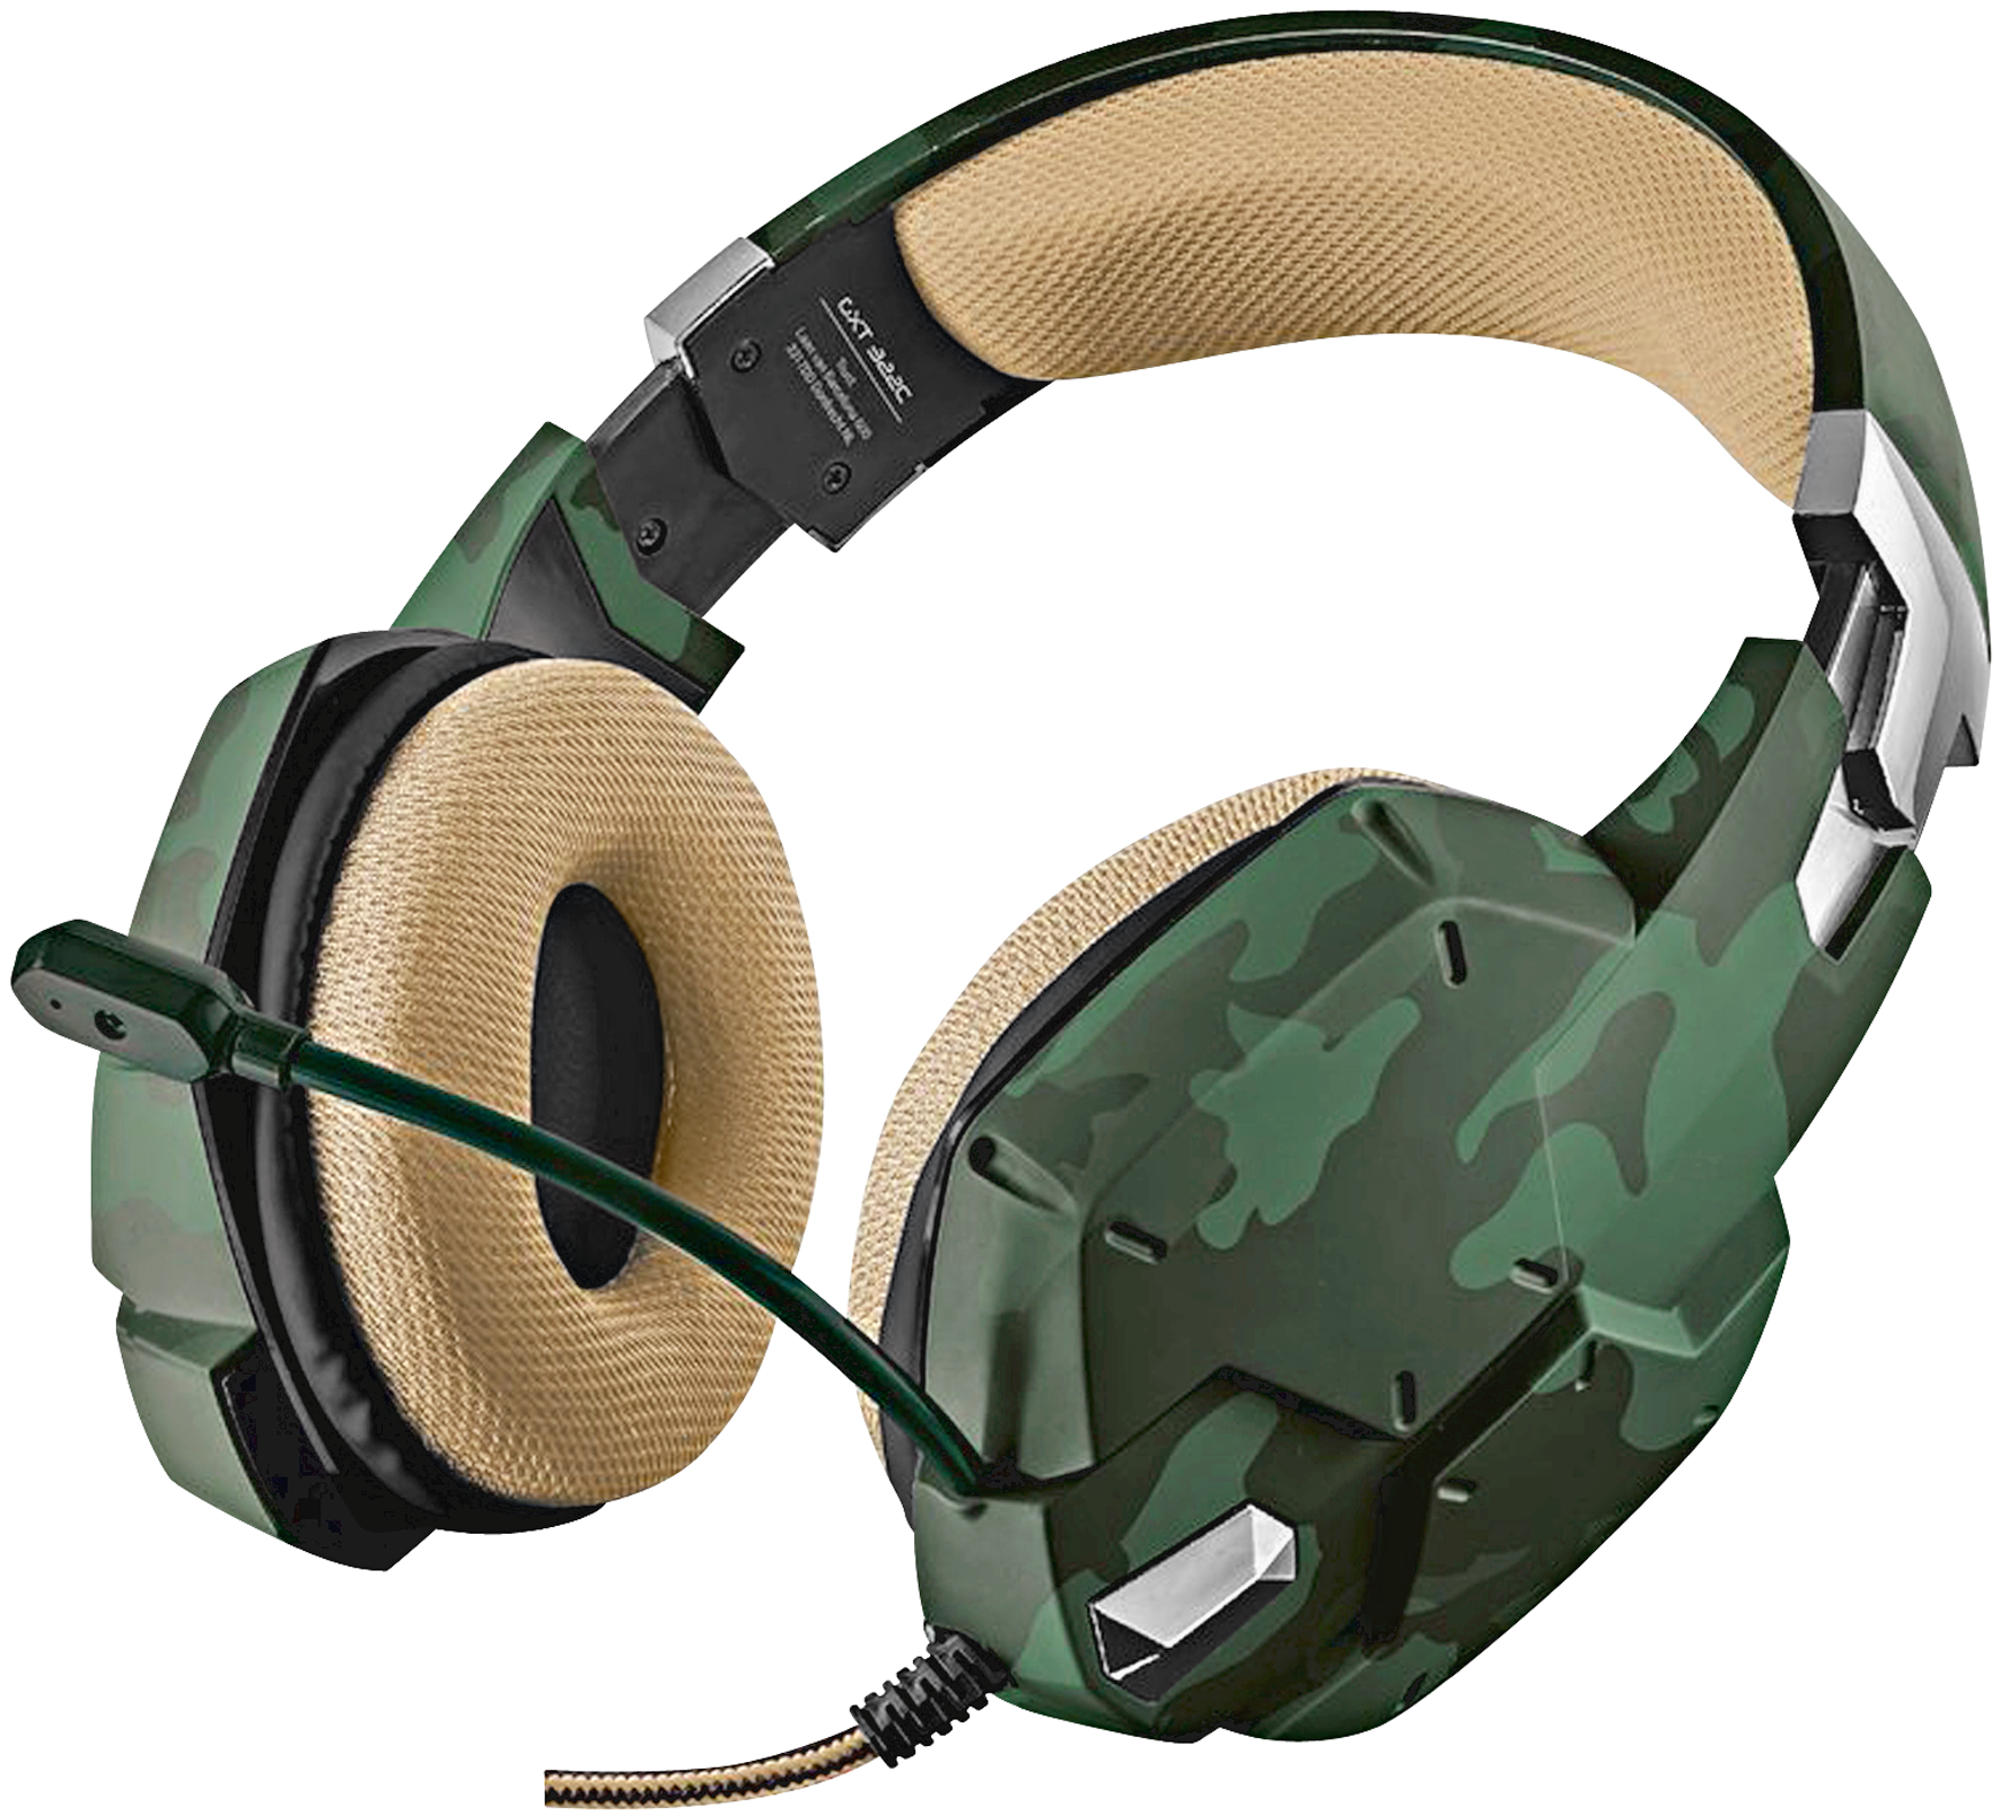 Trust Cascos Gaming gxt 322c carus auriculares con flexible y diadema ajustable cable de 1 para ps4 ps5 pc nintendo switch xbox one series verde camuflaje headset green